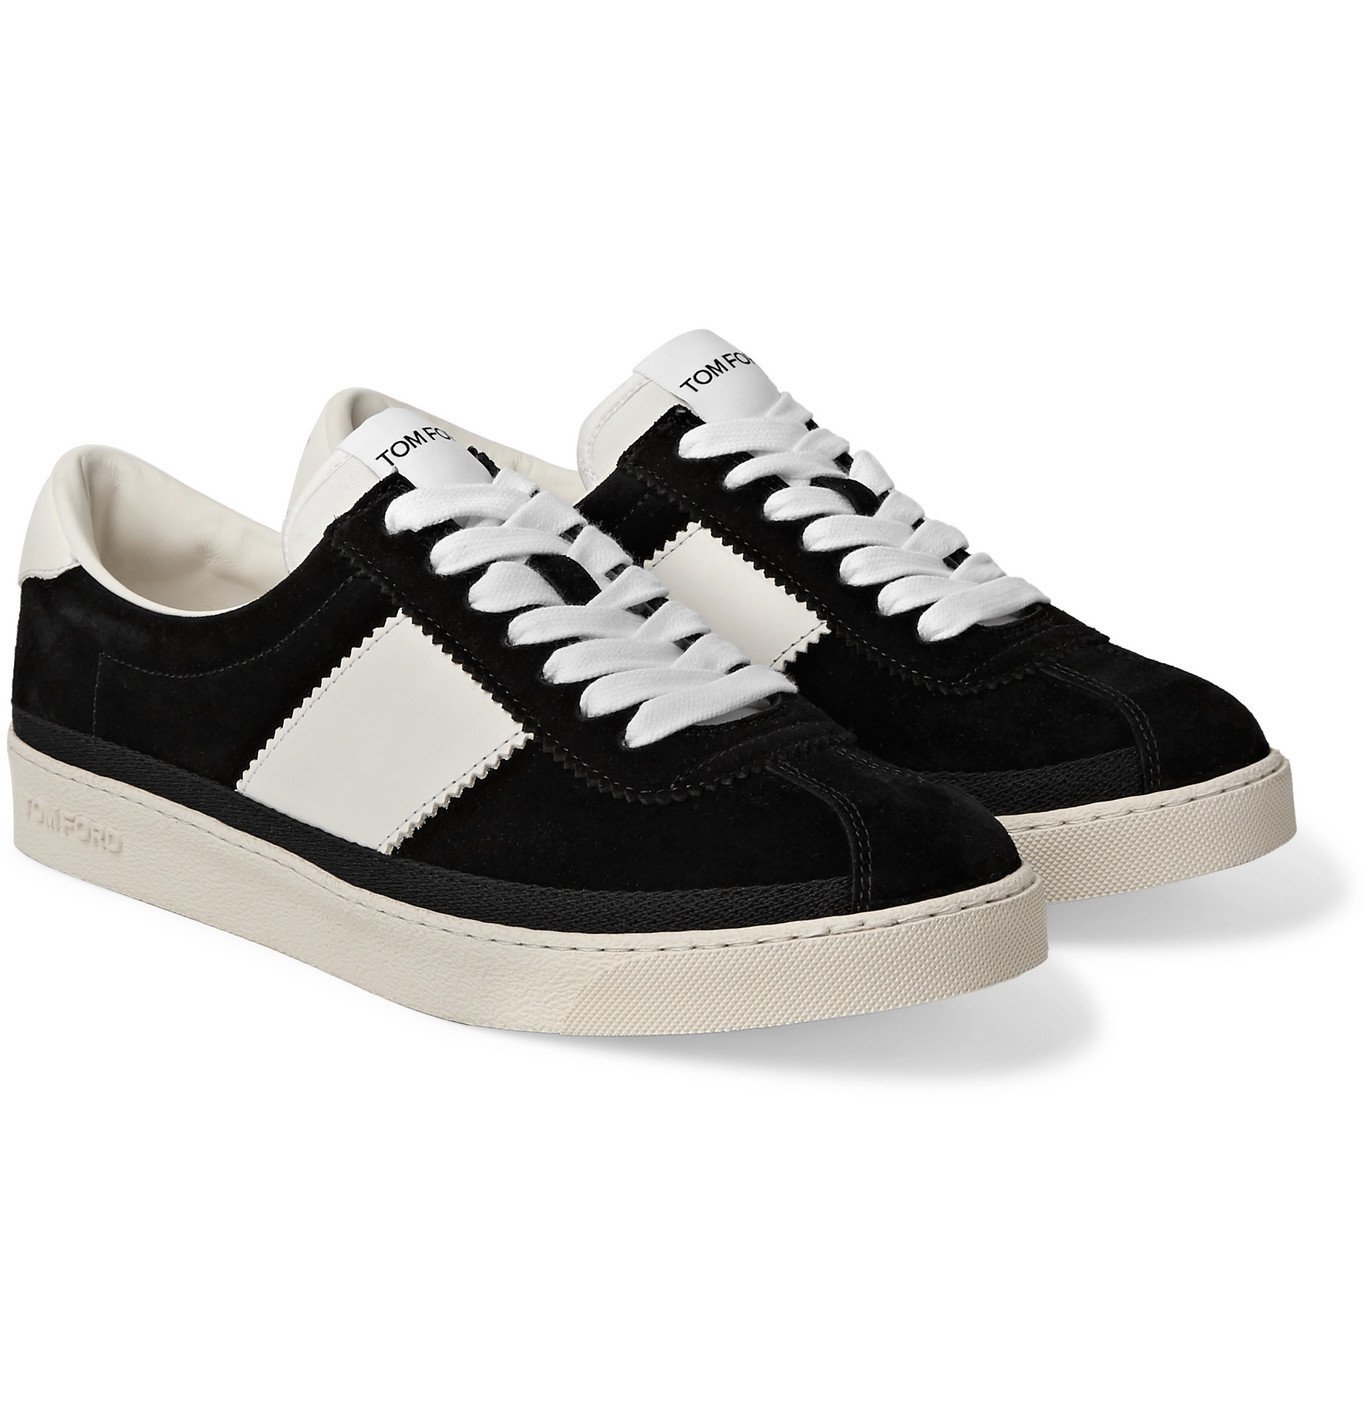 TOM FORD - Bannister Leather-Trimmed Suede Sneakers - Black TOM FORD